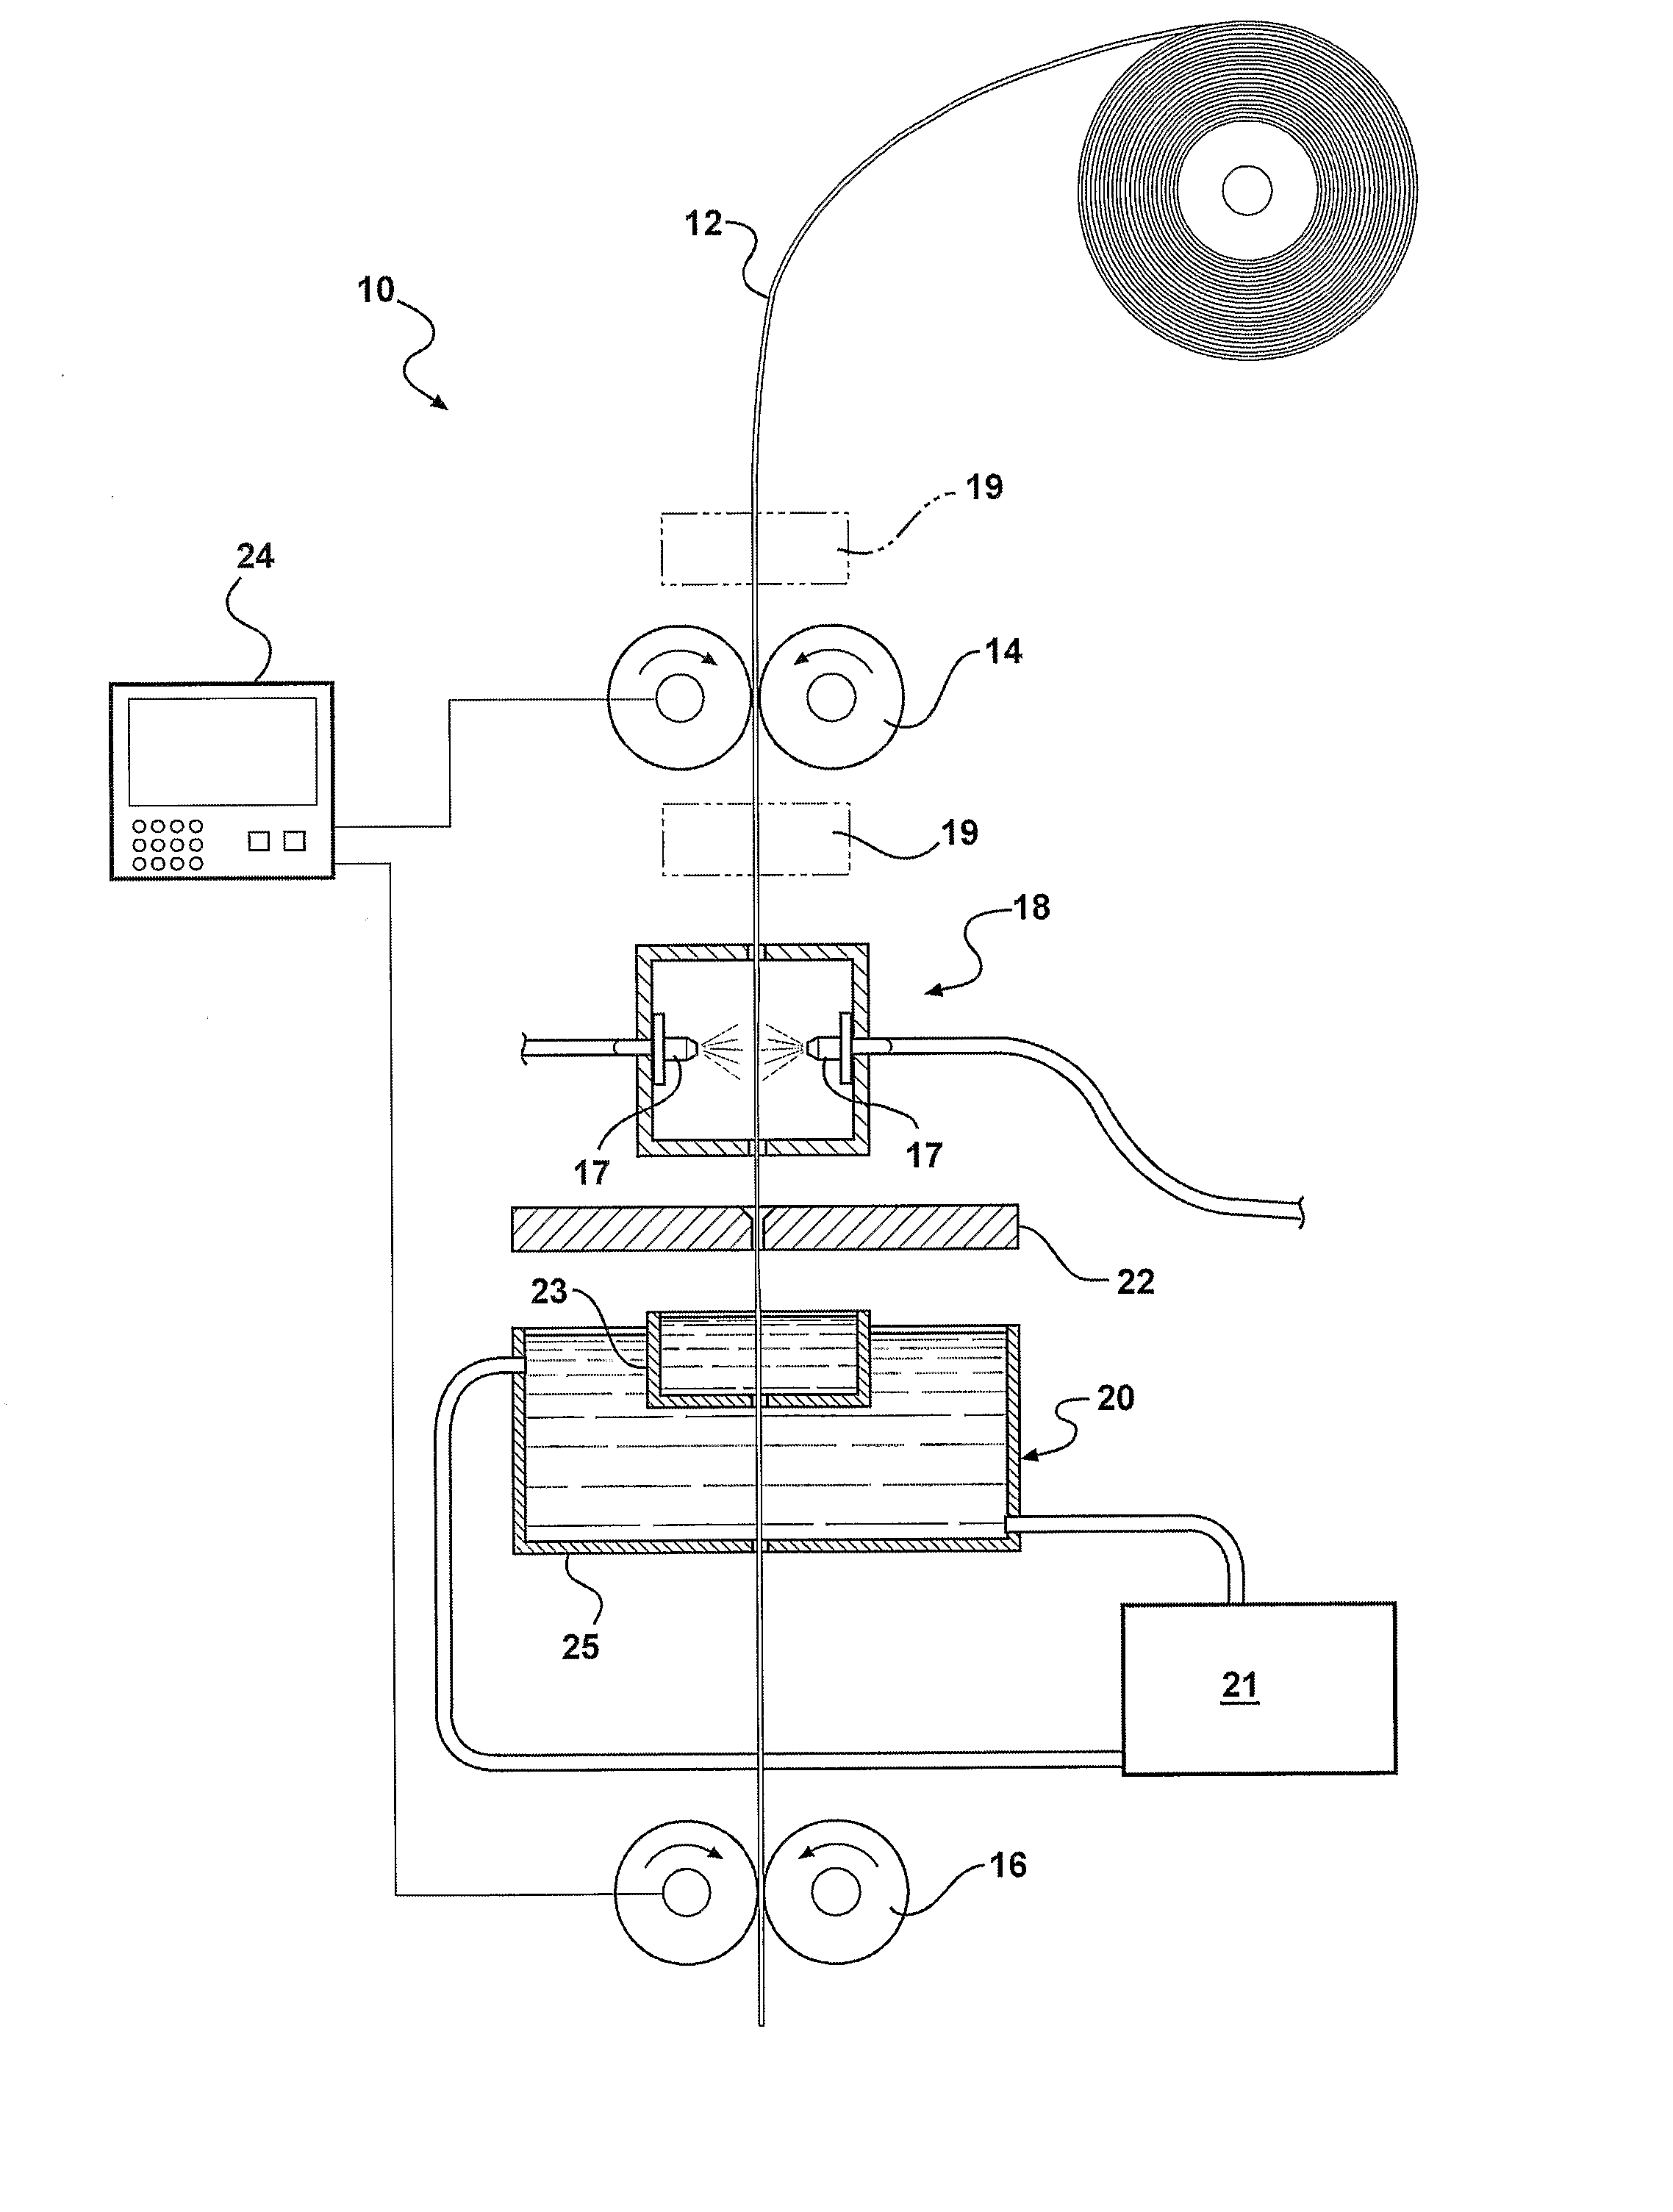 Method and Apparatus for Micro-Treating Iron-Based Alloy, and the Material Resulting Therefrom